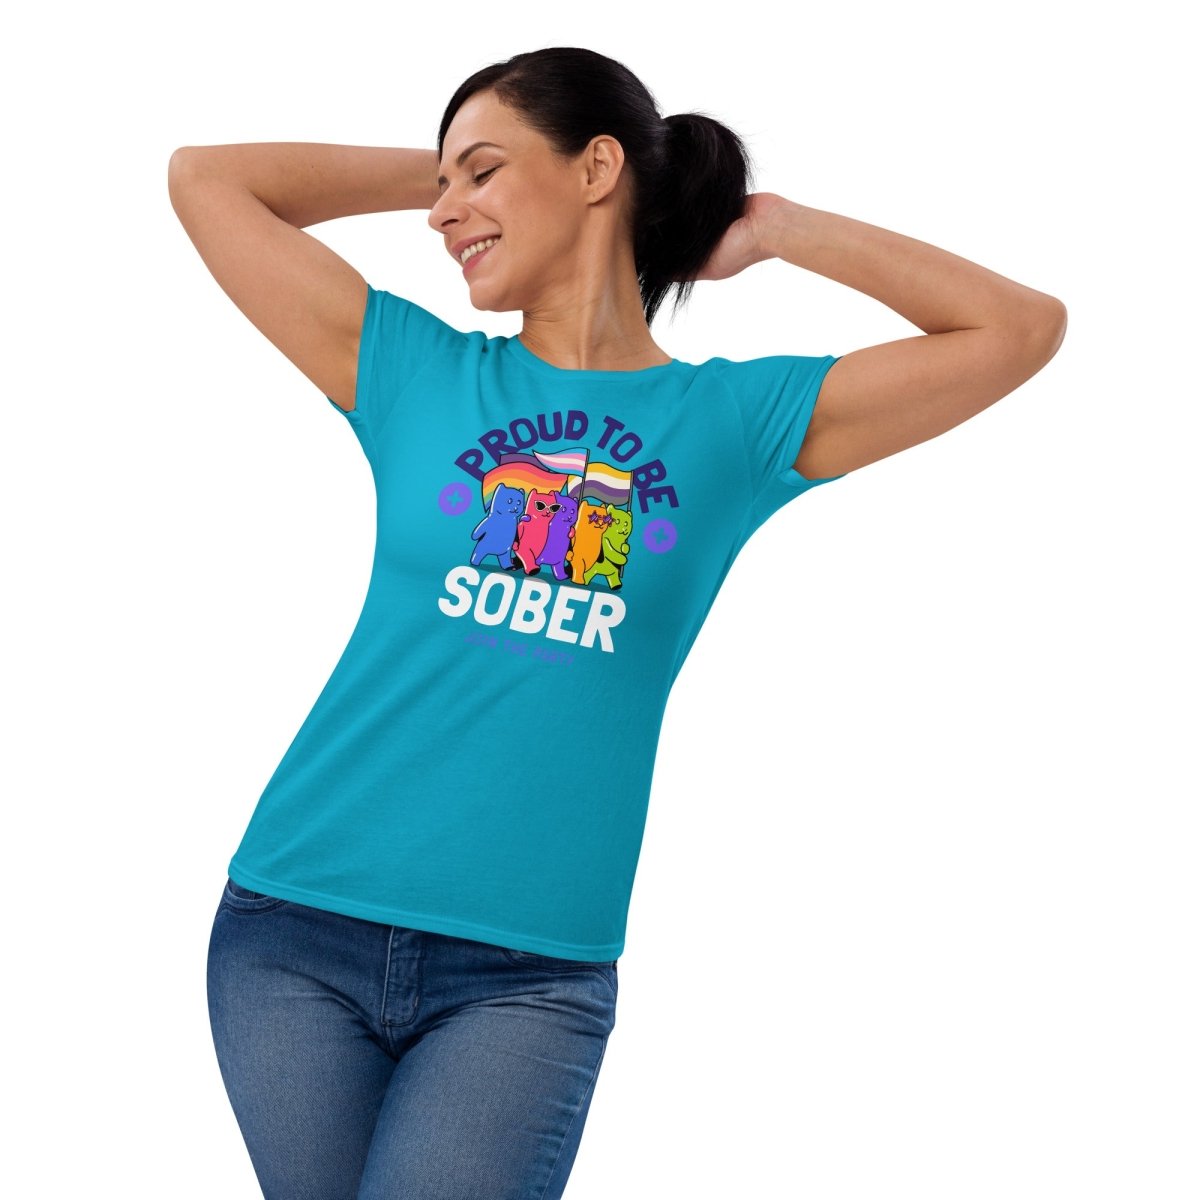 "Proud to be Sober" Women's Fashion Tee - Rainbow Resilience Collection - | Sobervation